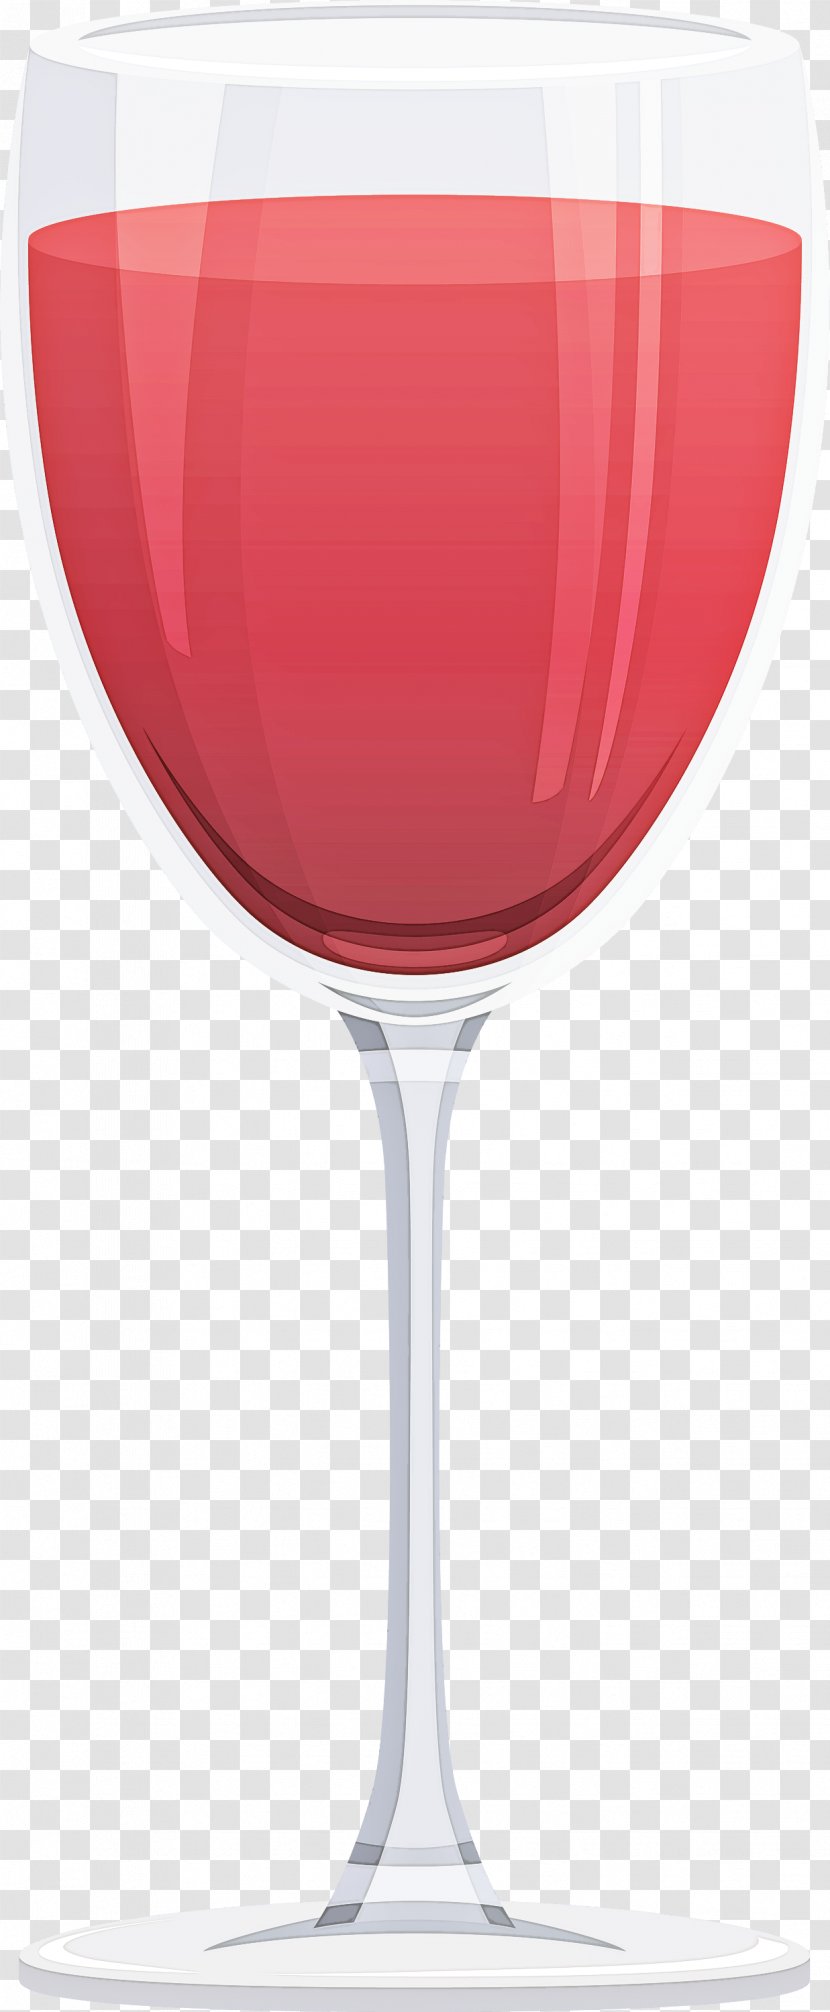 Wine Glass - Drinkware - Cocktail Alcoholic Beverage Transparent PNG